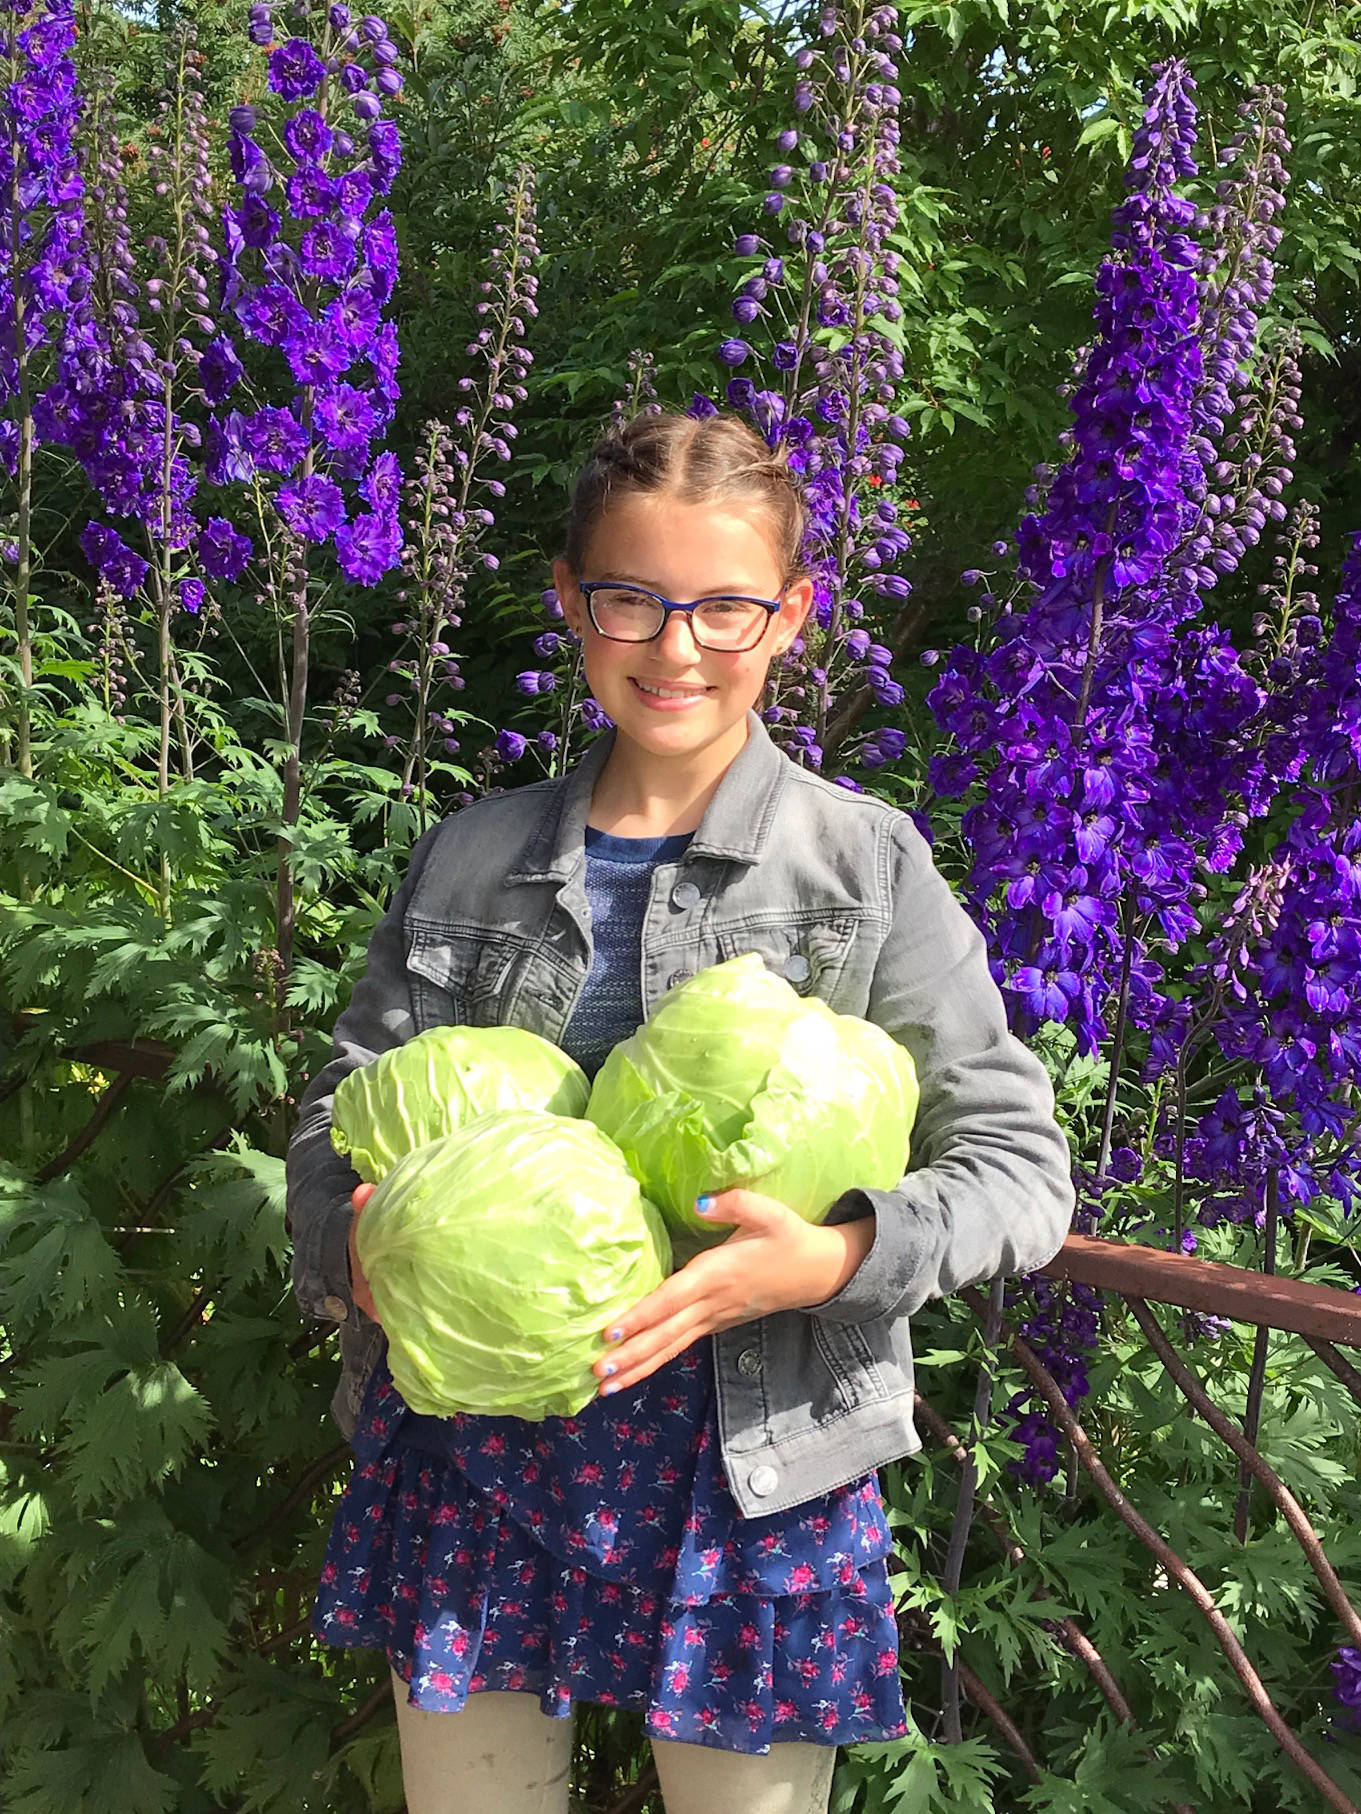 In this photo taken Aug. 10, 2018, in Homer, Alaska, Cecilia Fitzpatrick poses with her first ever cabbage harvest. (Photo by Rosemary Fitzpatrick)